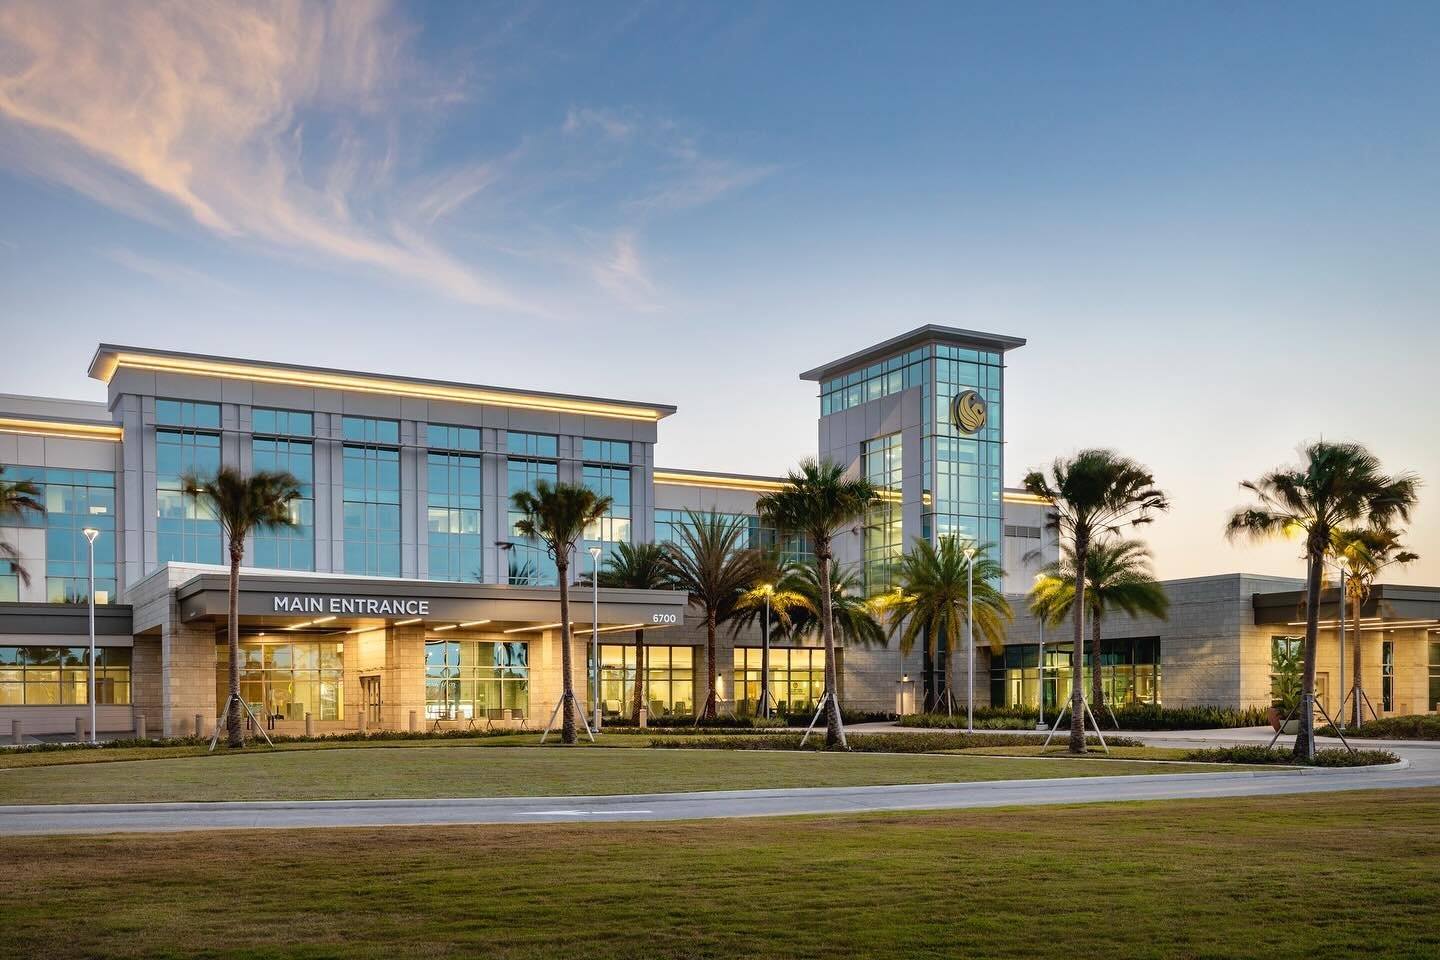 More palm trees please! ✨This week we are highlighting UCF LAKE NONA HOSPITAL in Orlando, FL for #wlam 

Catalyst provided planning, civil engineering, and landscape architectural services for this groundbreaking new hospital in Orlando, FL. The land